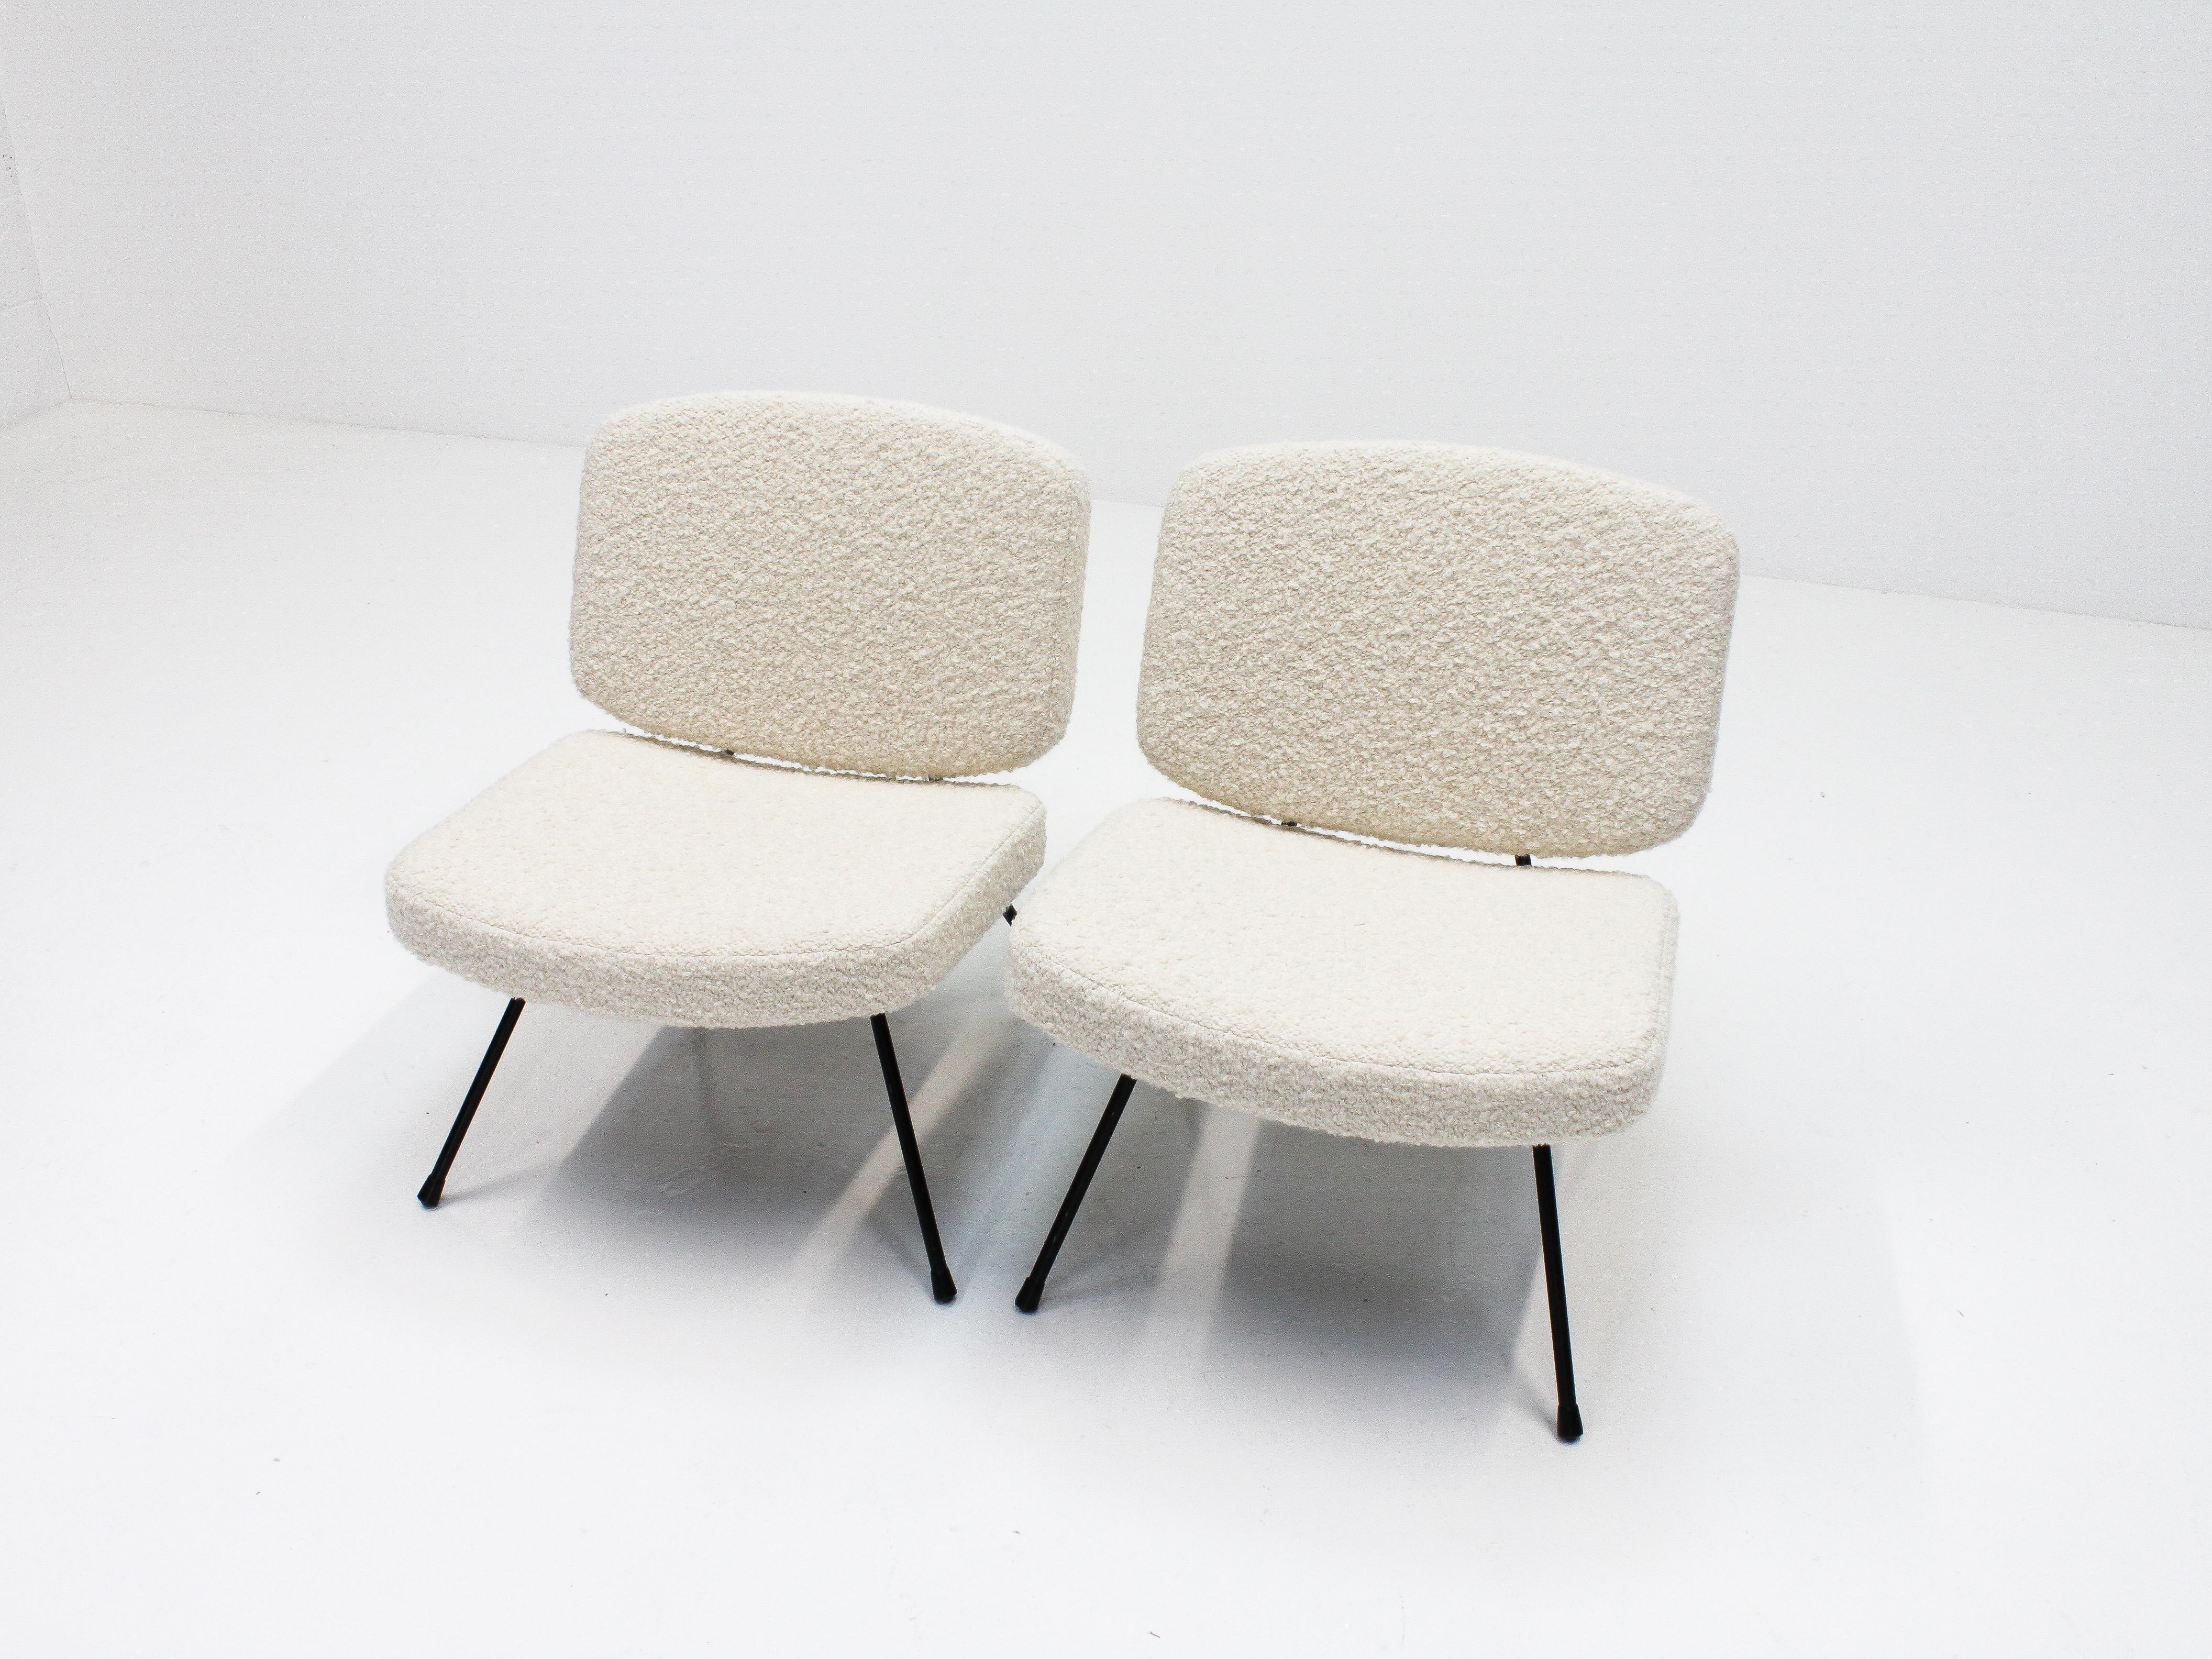 20th Century Pair of Pierre Paulin CM 190 Lounge Chairs in Pierre Frey, Thonet, 1950s